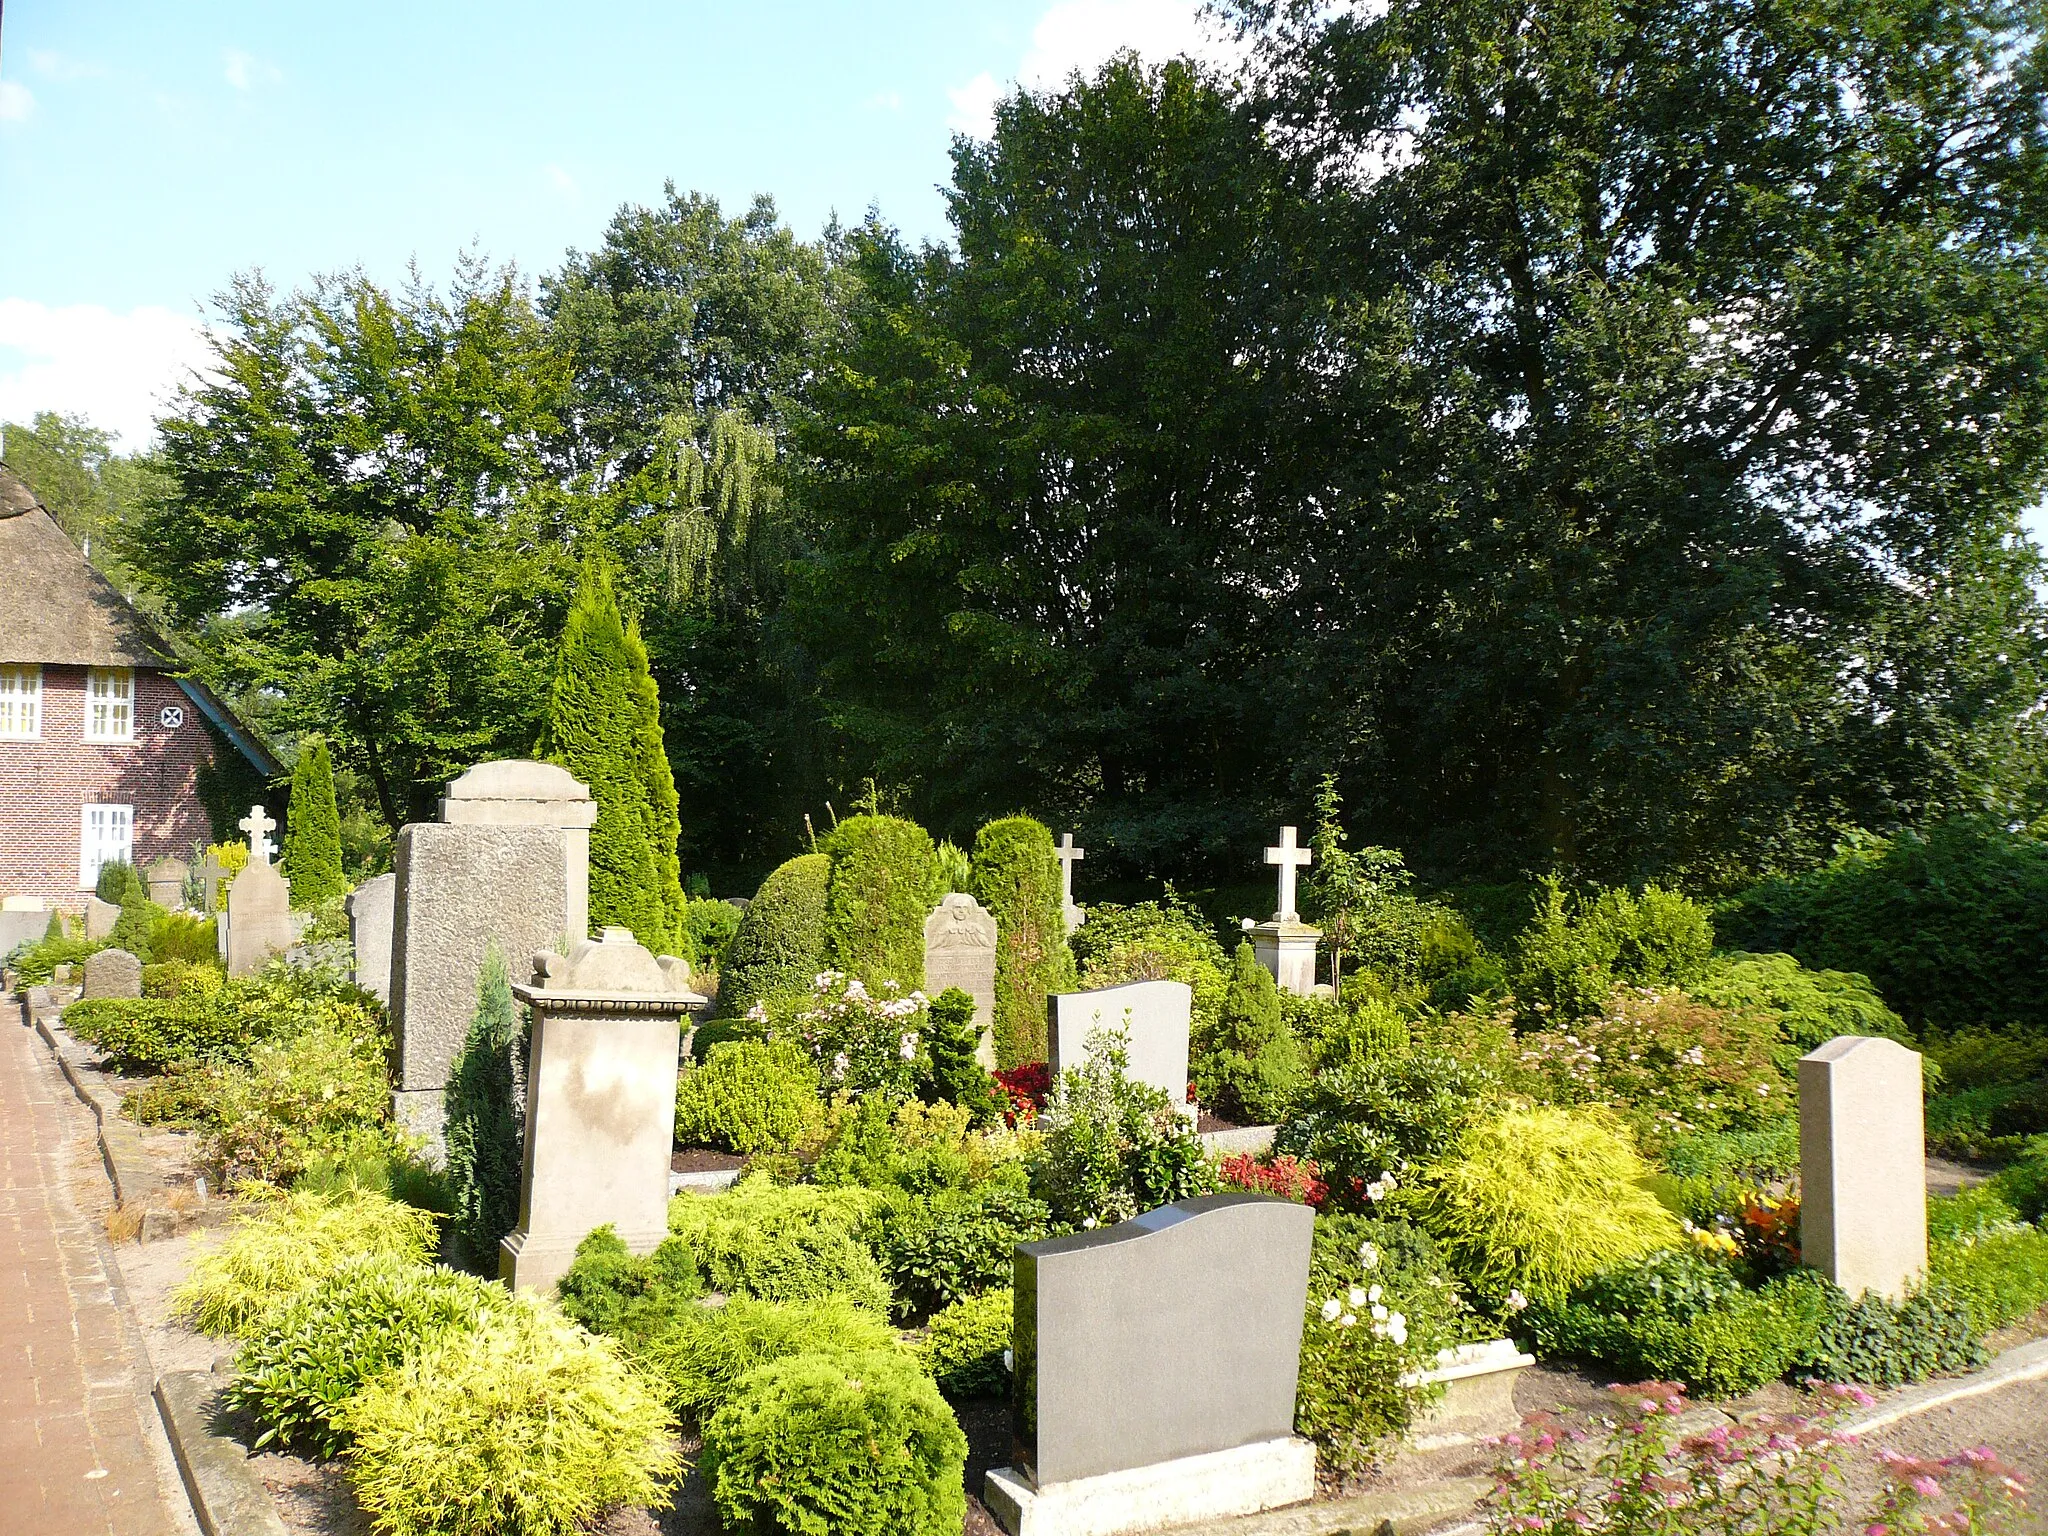 Photo showing: The cemetery of the church of St. Jürgen in Lower Saxony